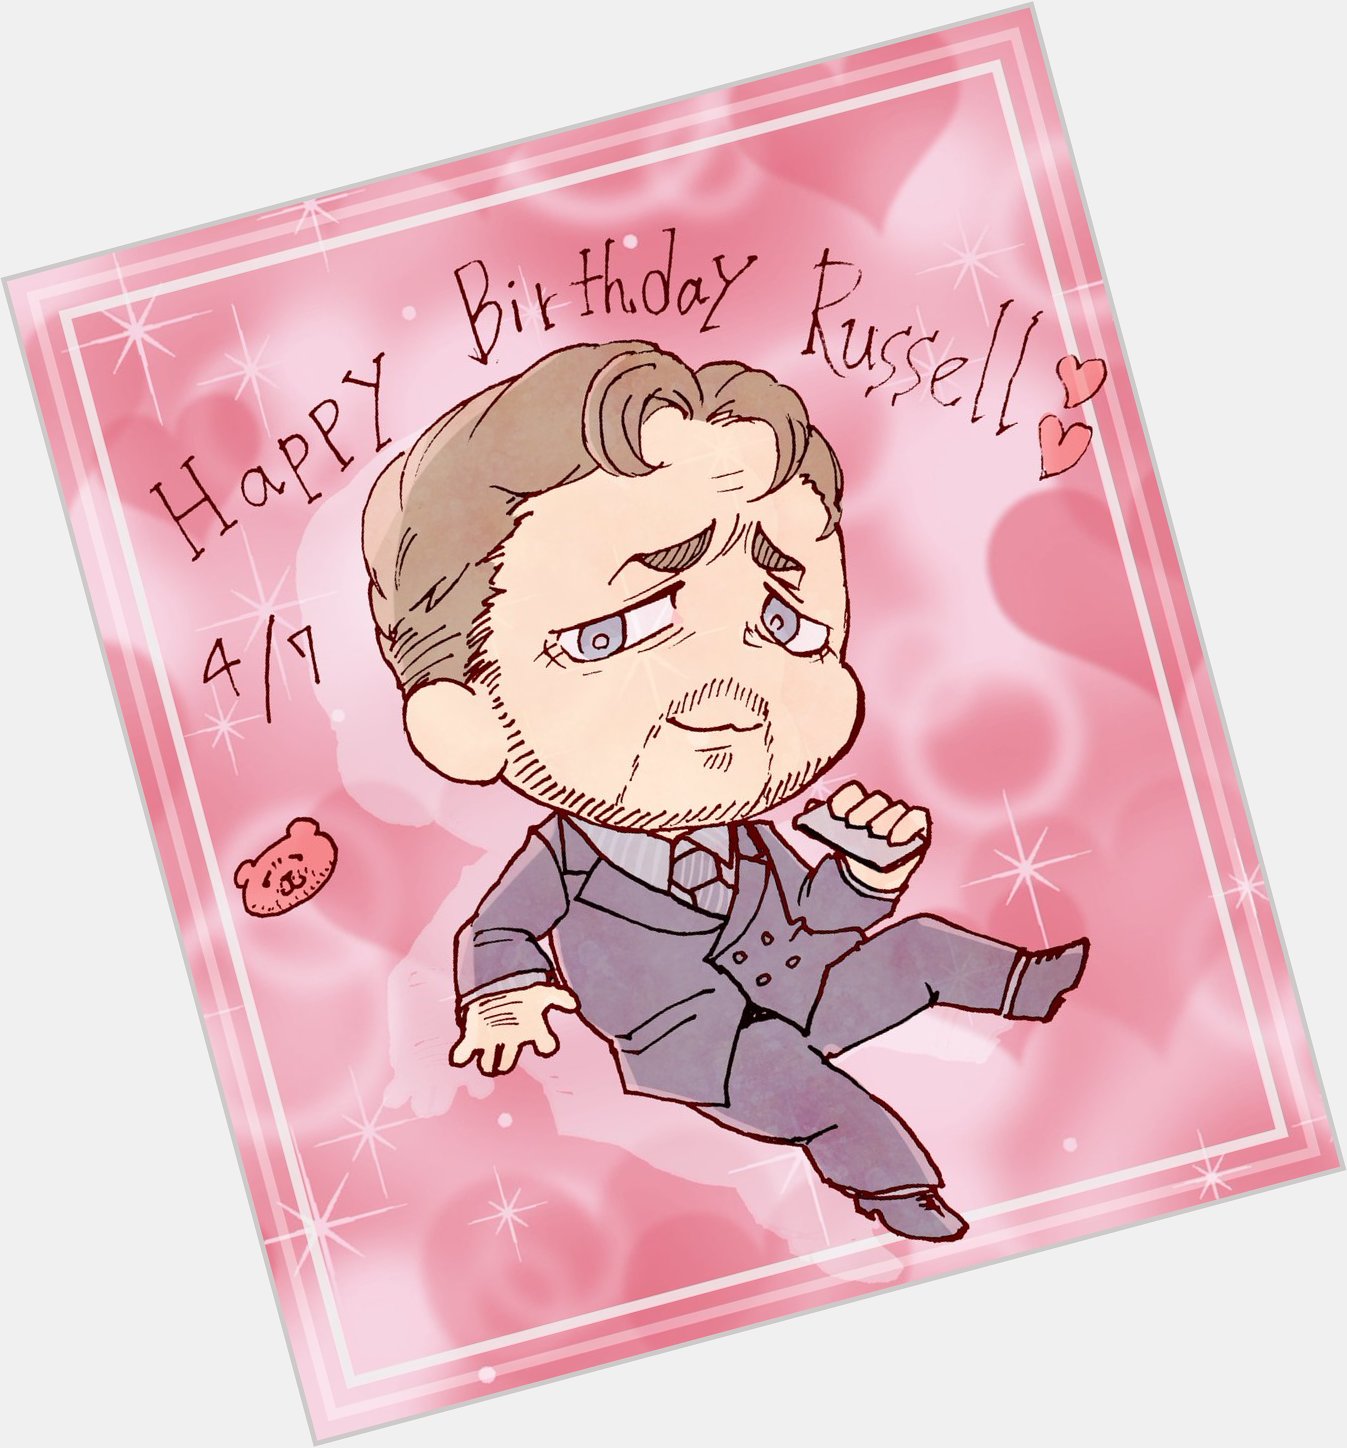                                                Happy birthday Russell Crowe !!! 